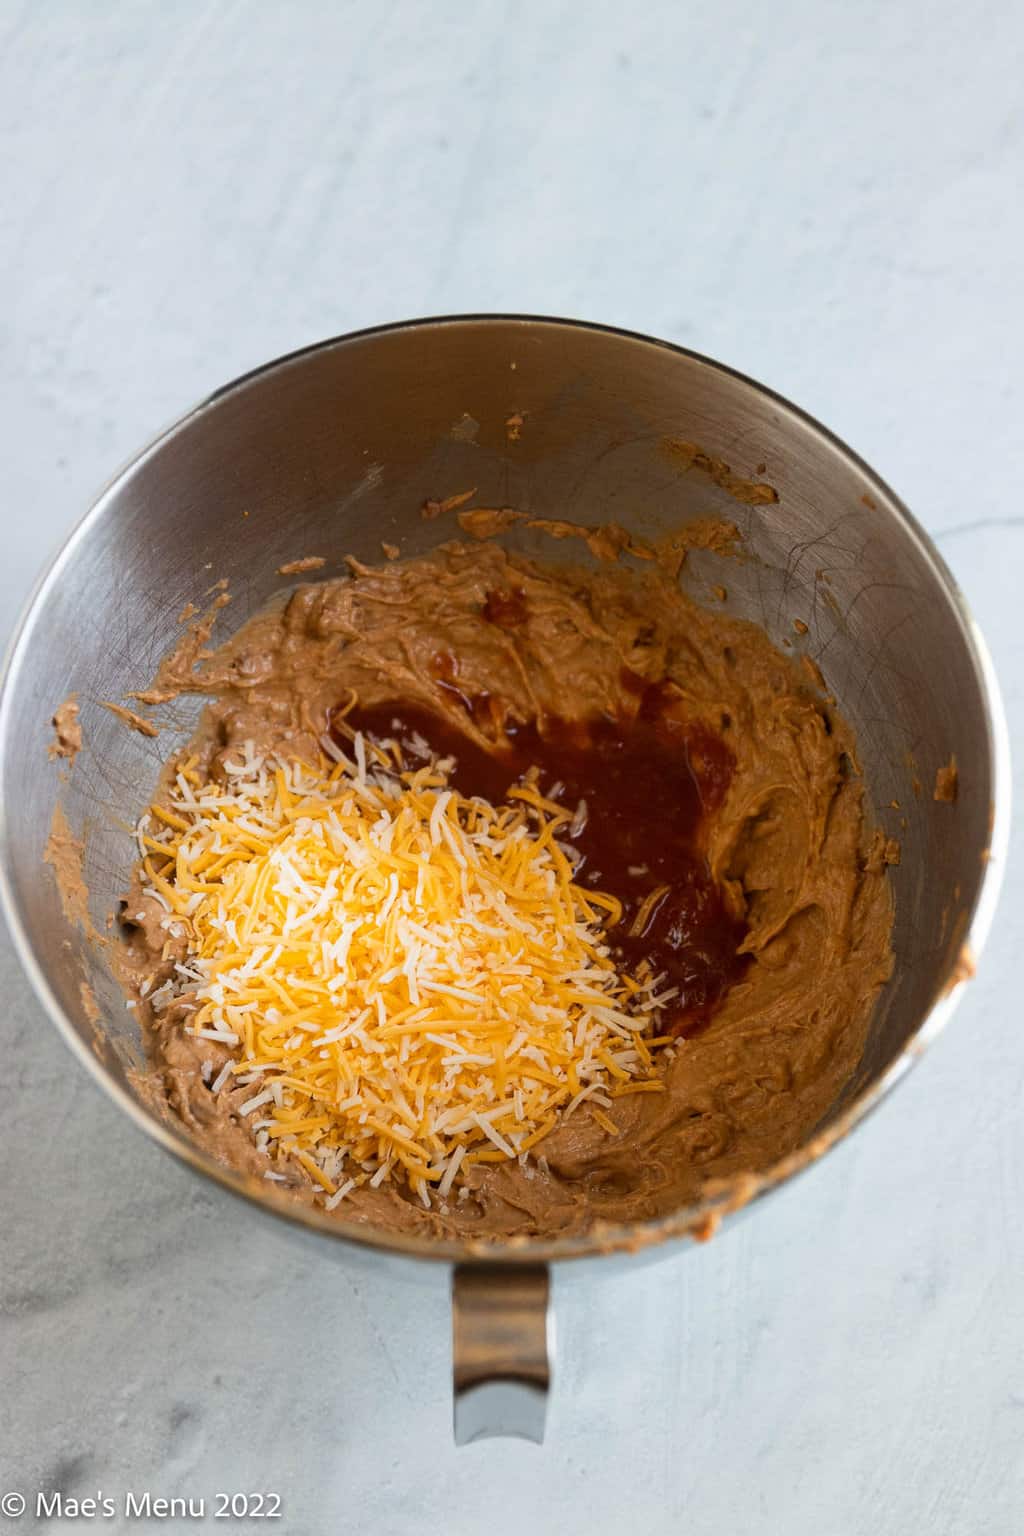 A mixing bowl of refried beans mix, salsa, and shredded cheese.